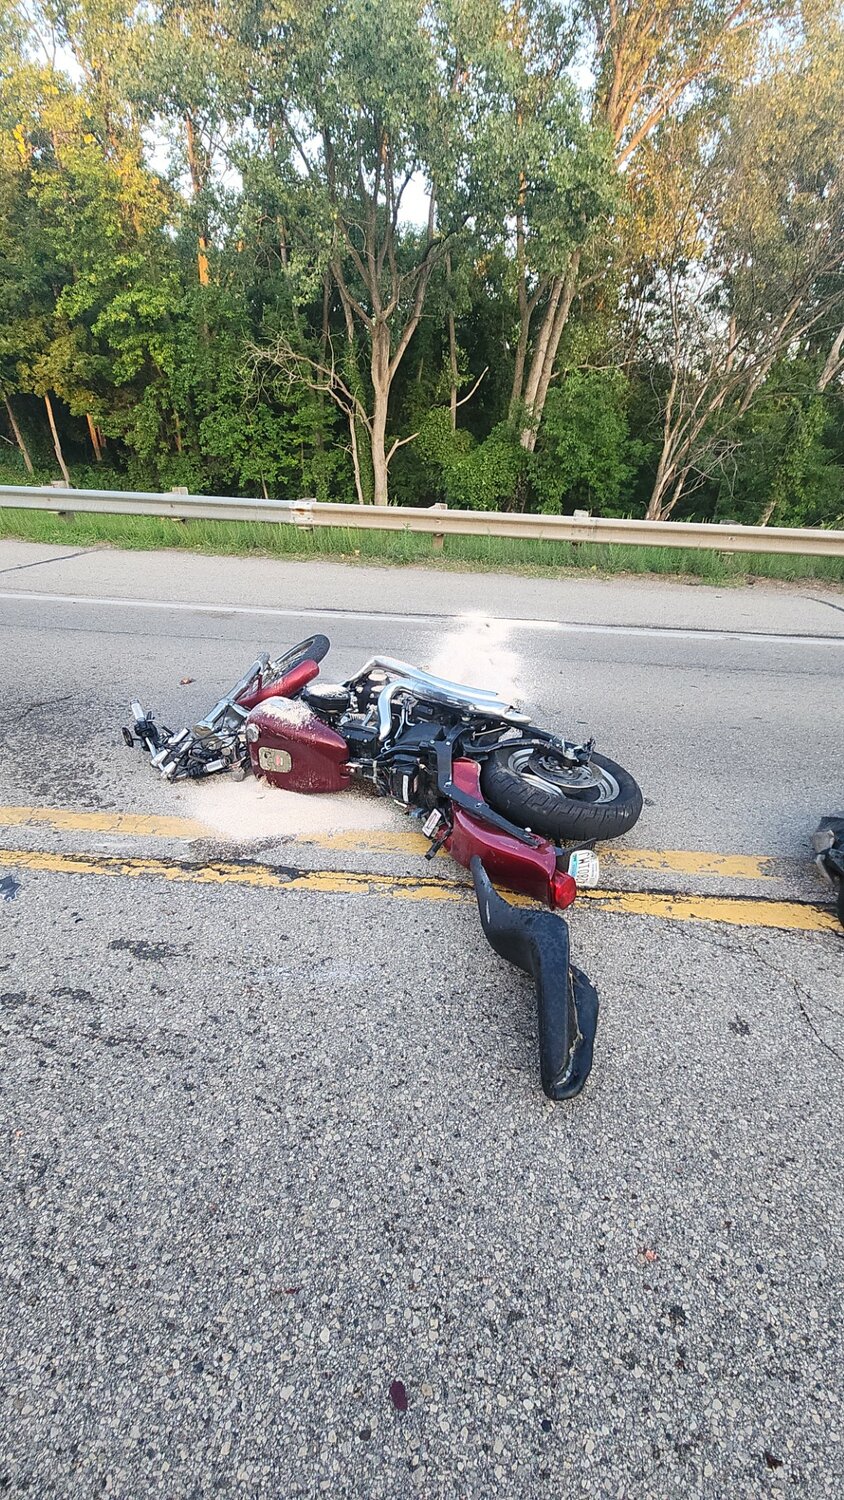 A 58-year-old Red Wing man died Saturday as a result of a crash between his 2004 Harley and a 2015 Chevy Equinox.